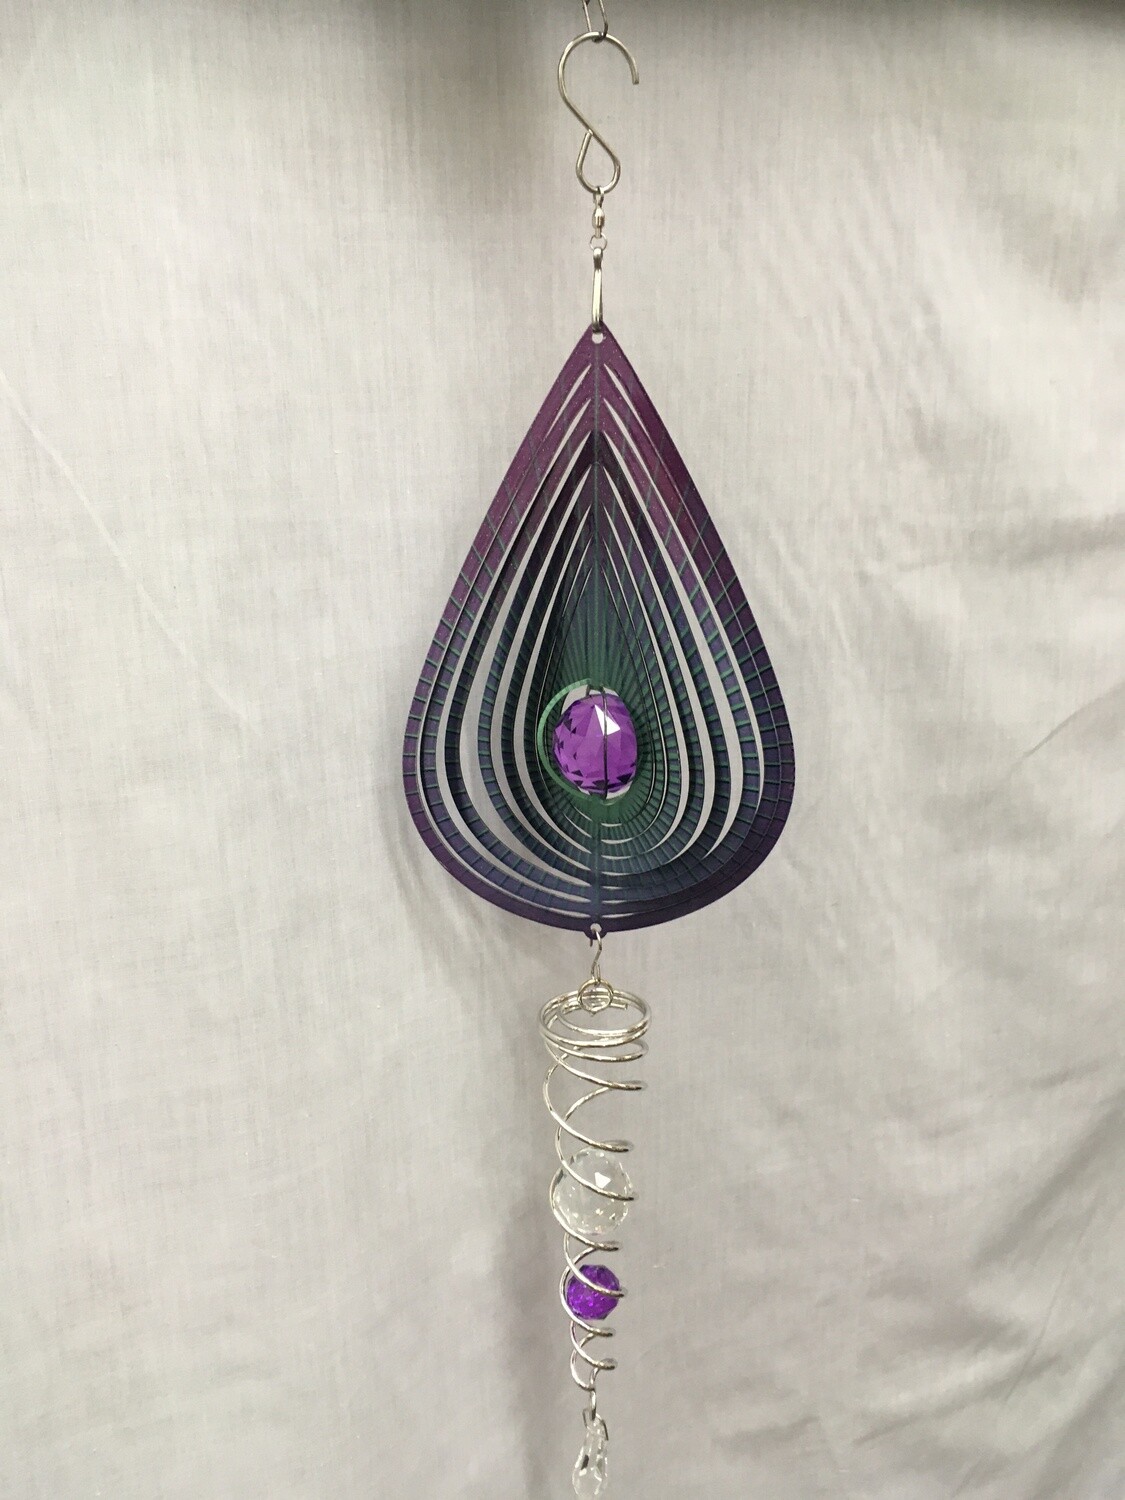 Spinner Set - Purple Tear Drop Small Wind Spinner with Twister Spiral Tail double crystal Tail 